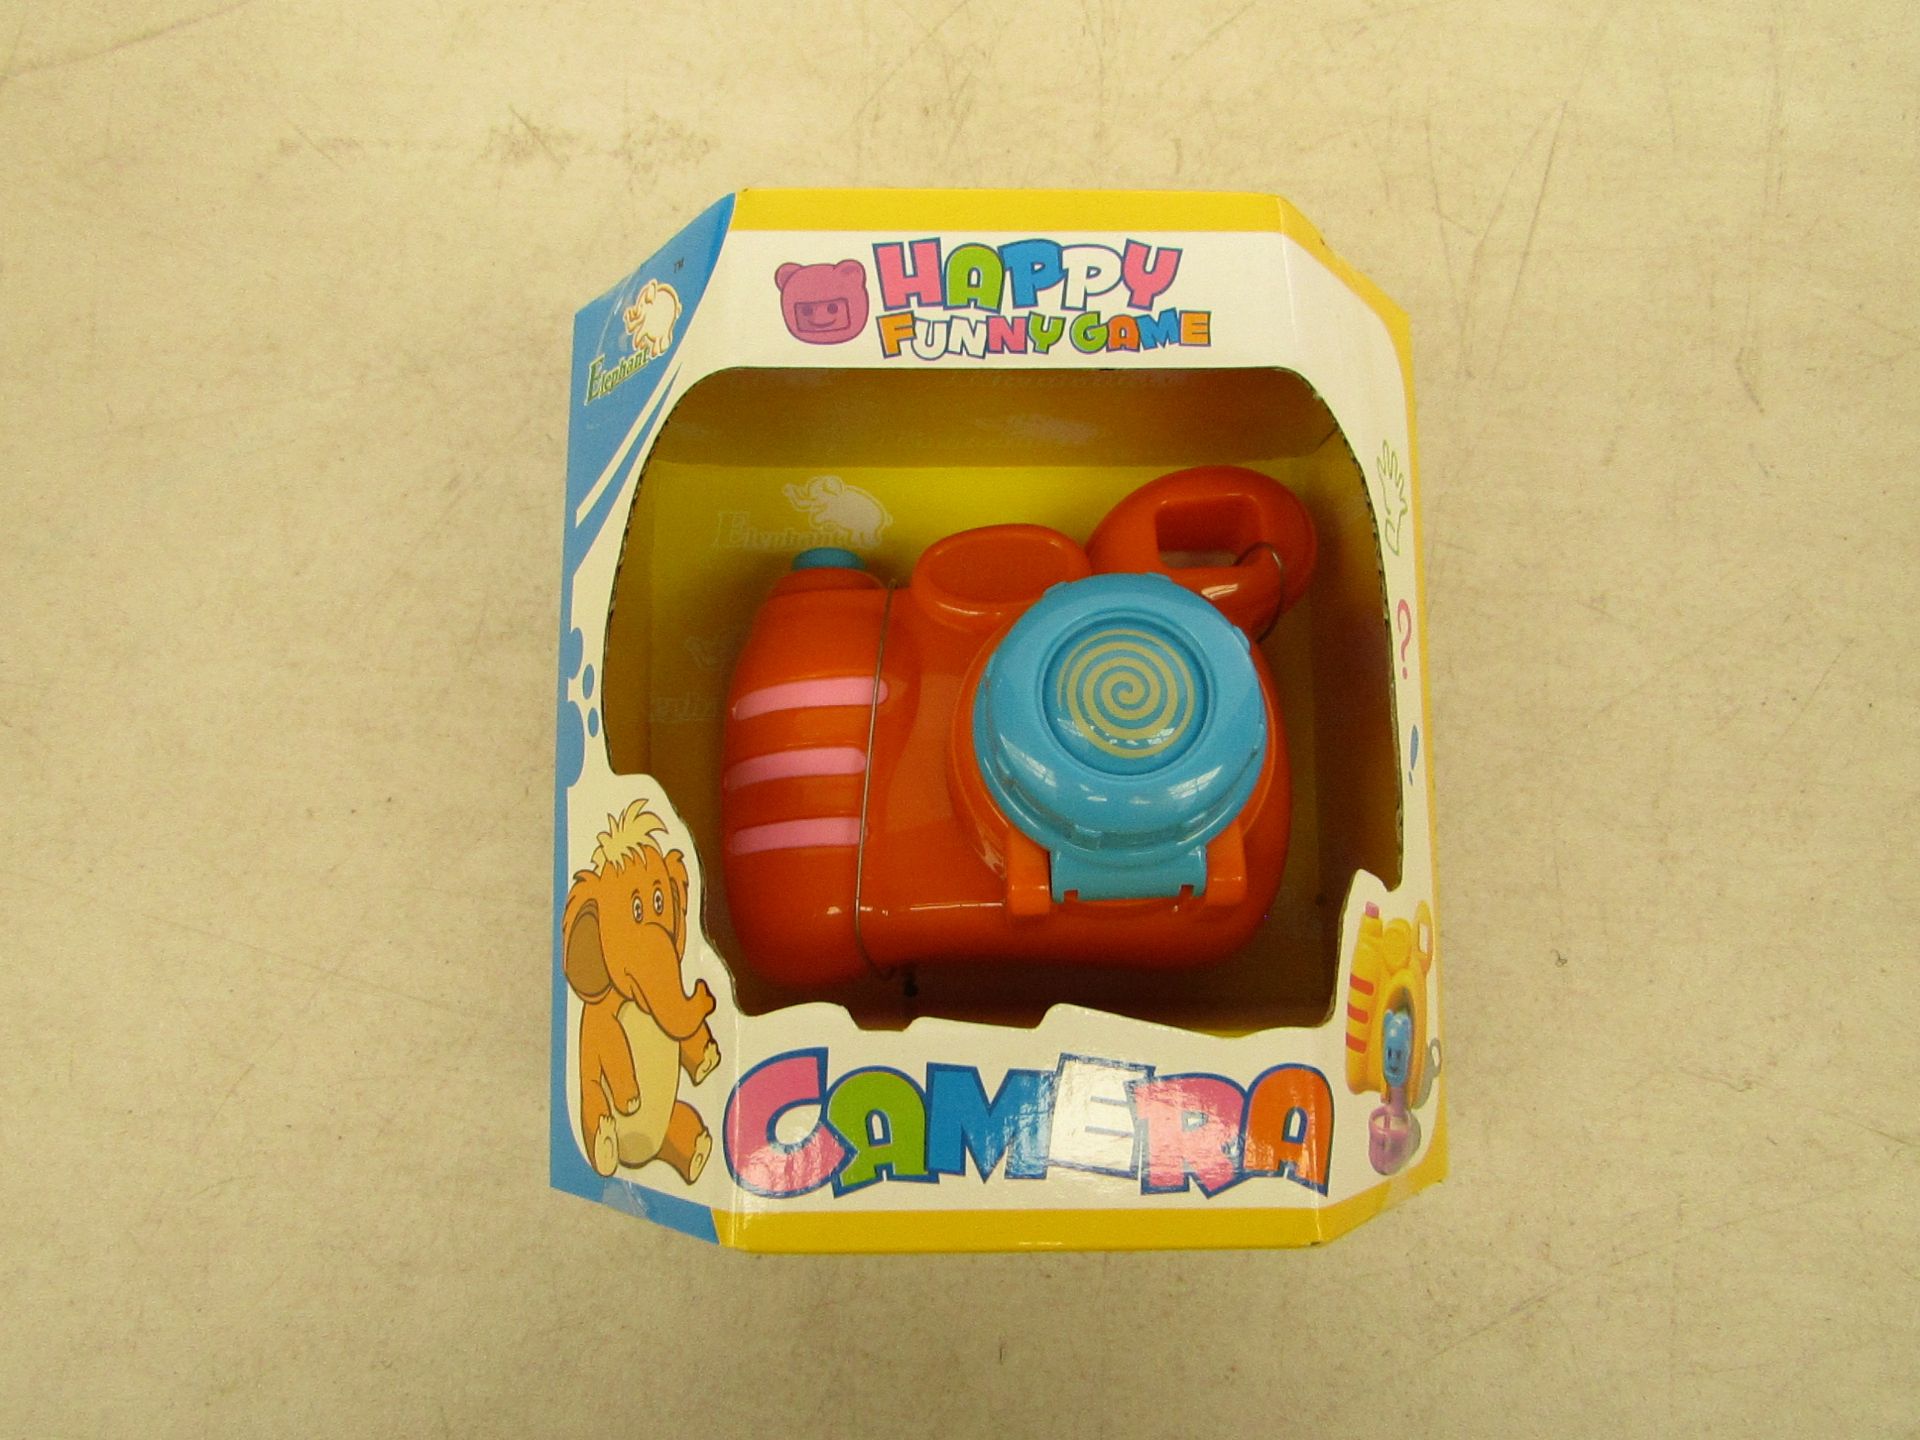 5x Elephant happy funny game camera, all look unused and boxed.